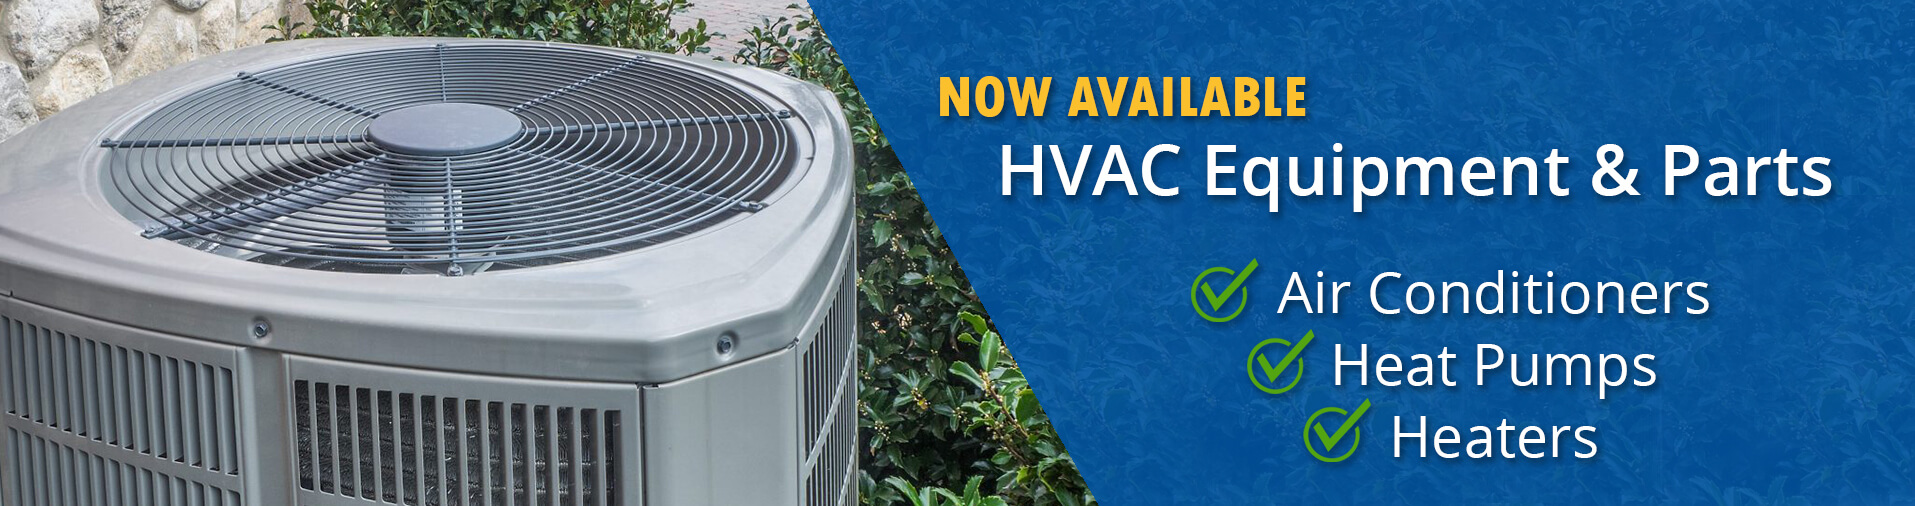 HVAC Air Conditioning and Heater Sales